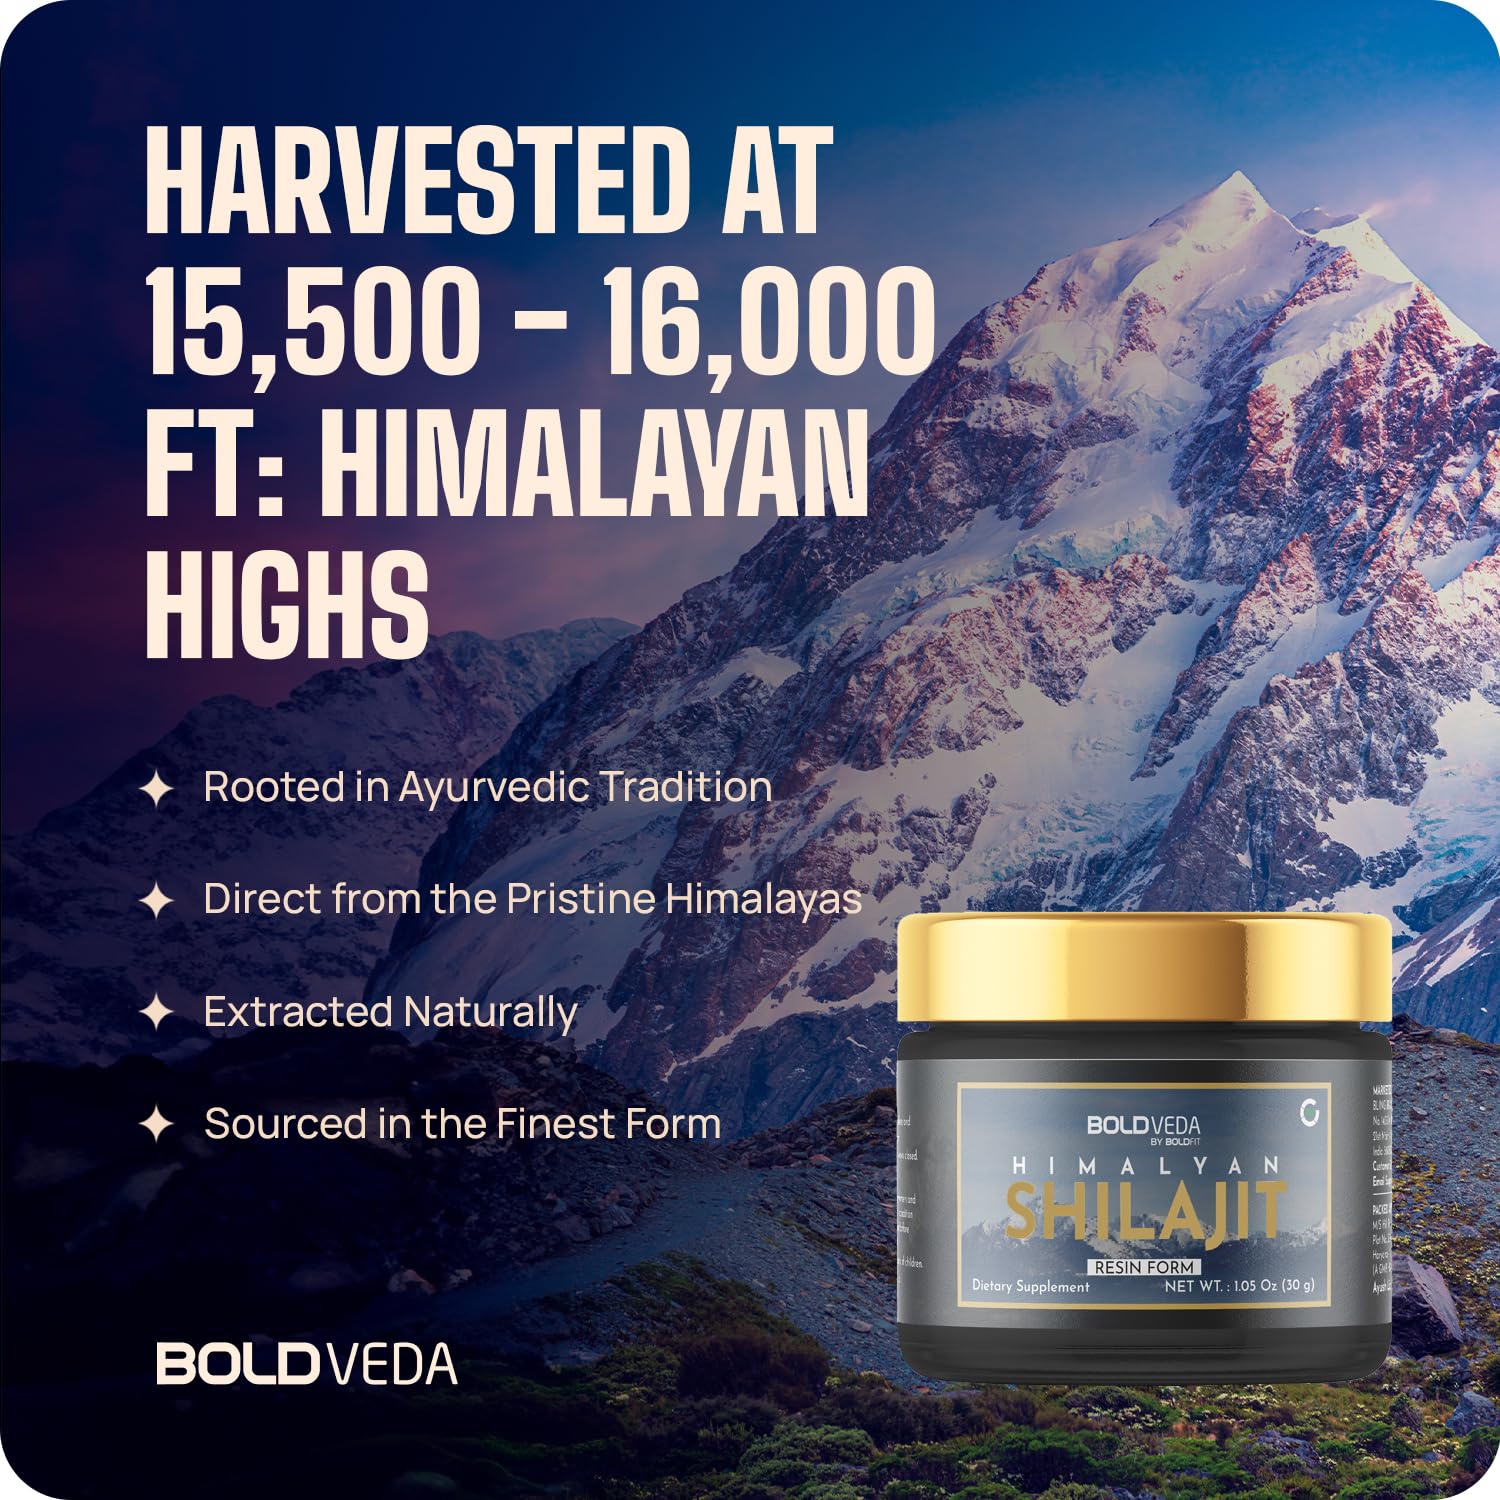 BOLDVEDA Shilajit Pure Himalayan Organic Resin - 30g Pure Natural Shilajit with Fulvic Acid and Trace Minerals - Authentic Resin to Improve Daily Wellness - Vital Herbs Shilajit Supplement for Men